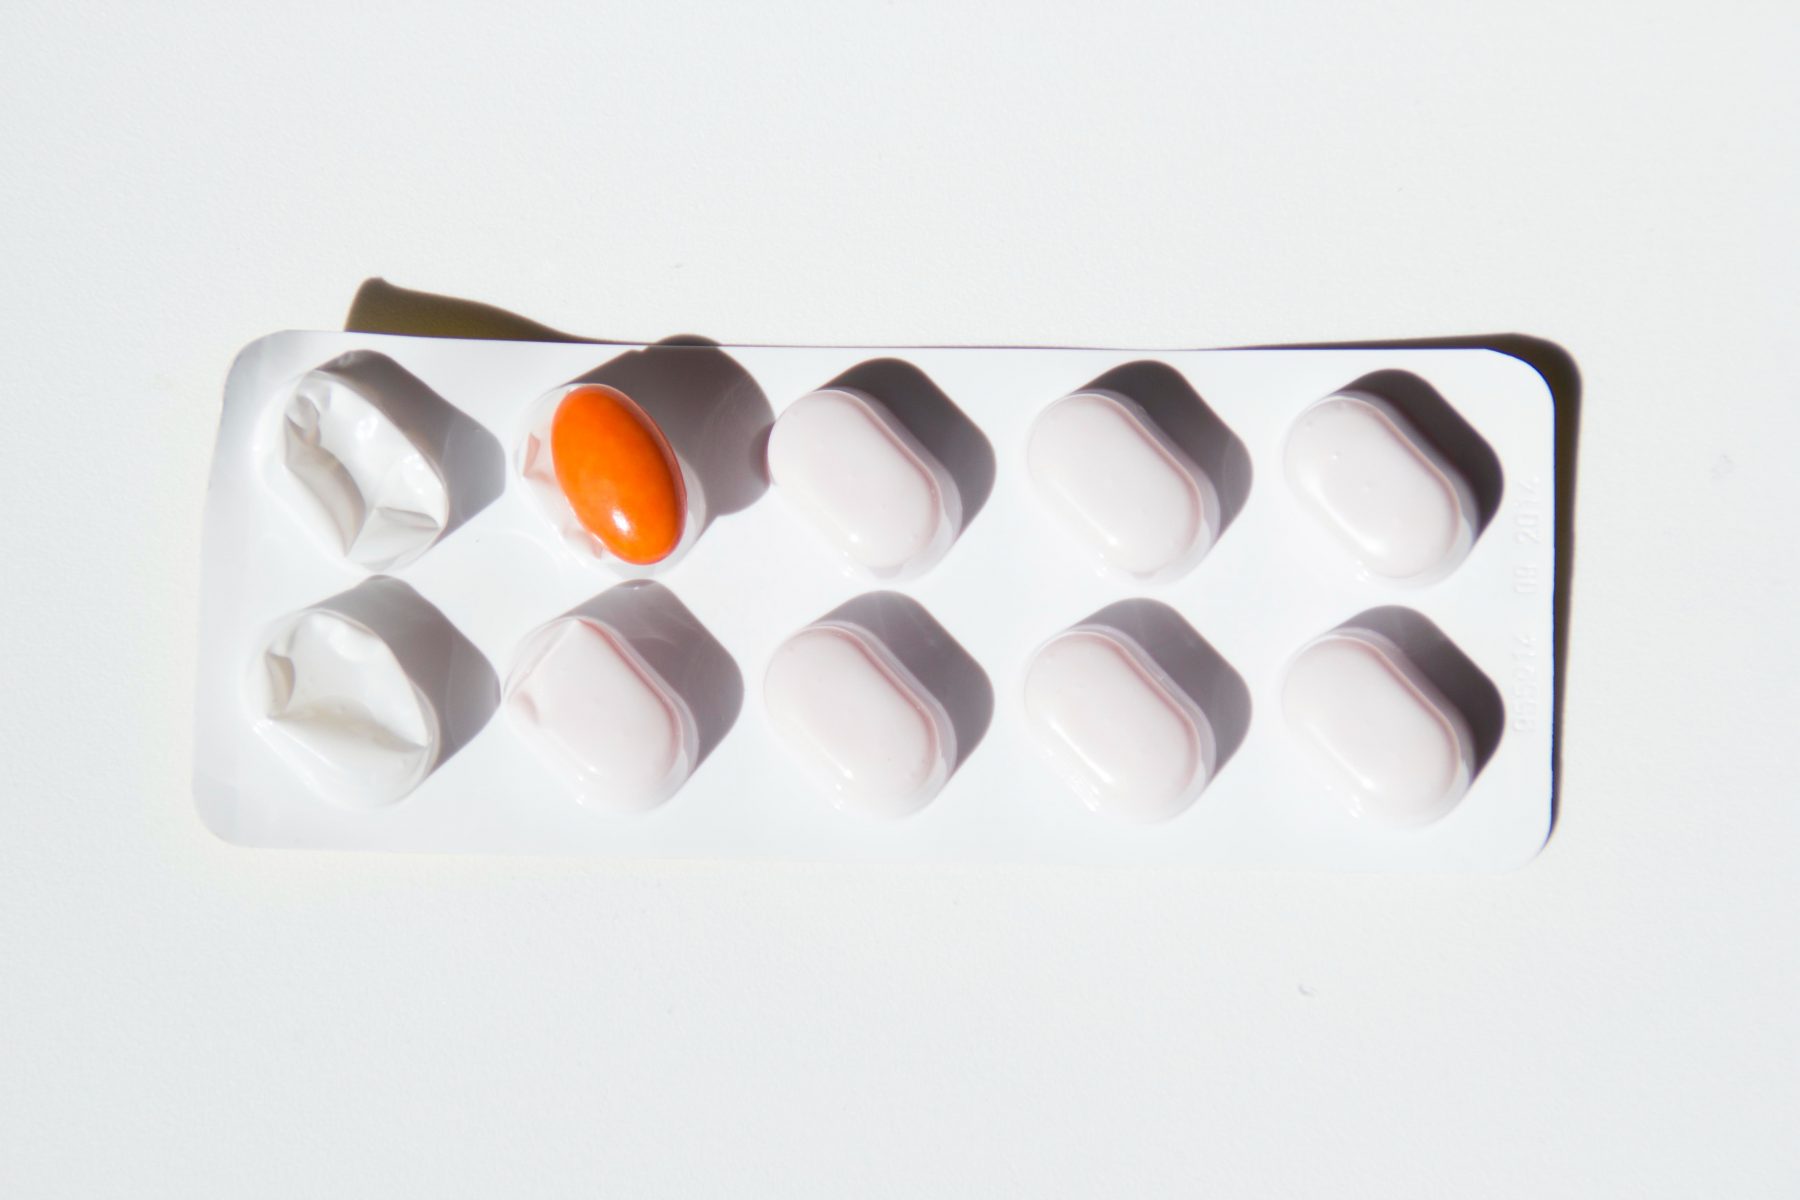 Pills sachet with an orange pill on the second slot.